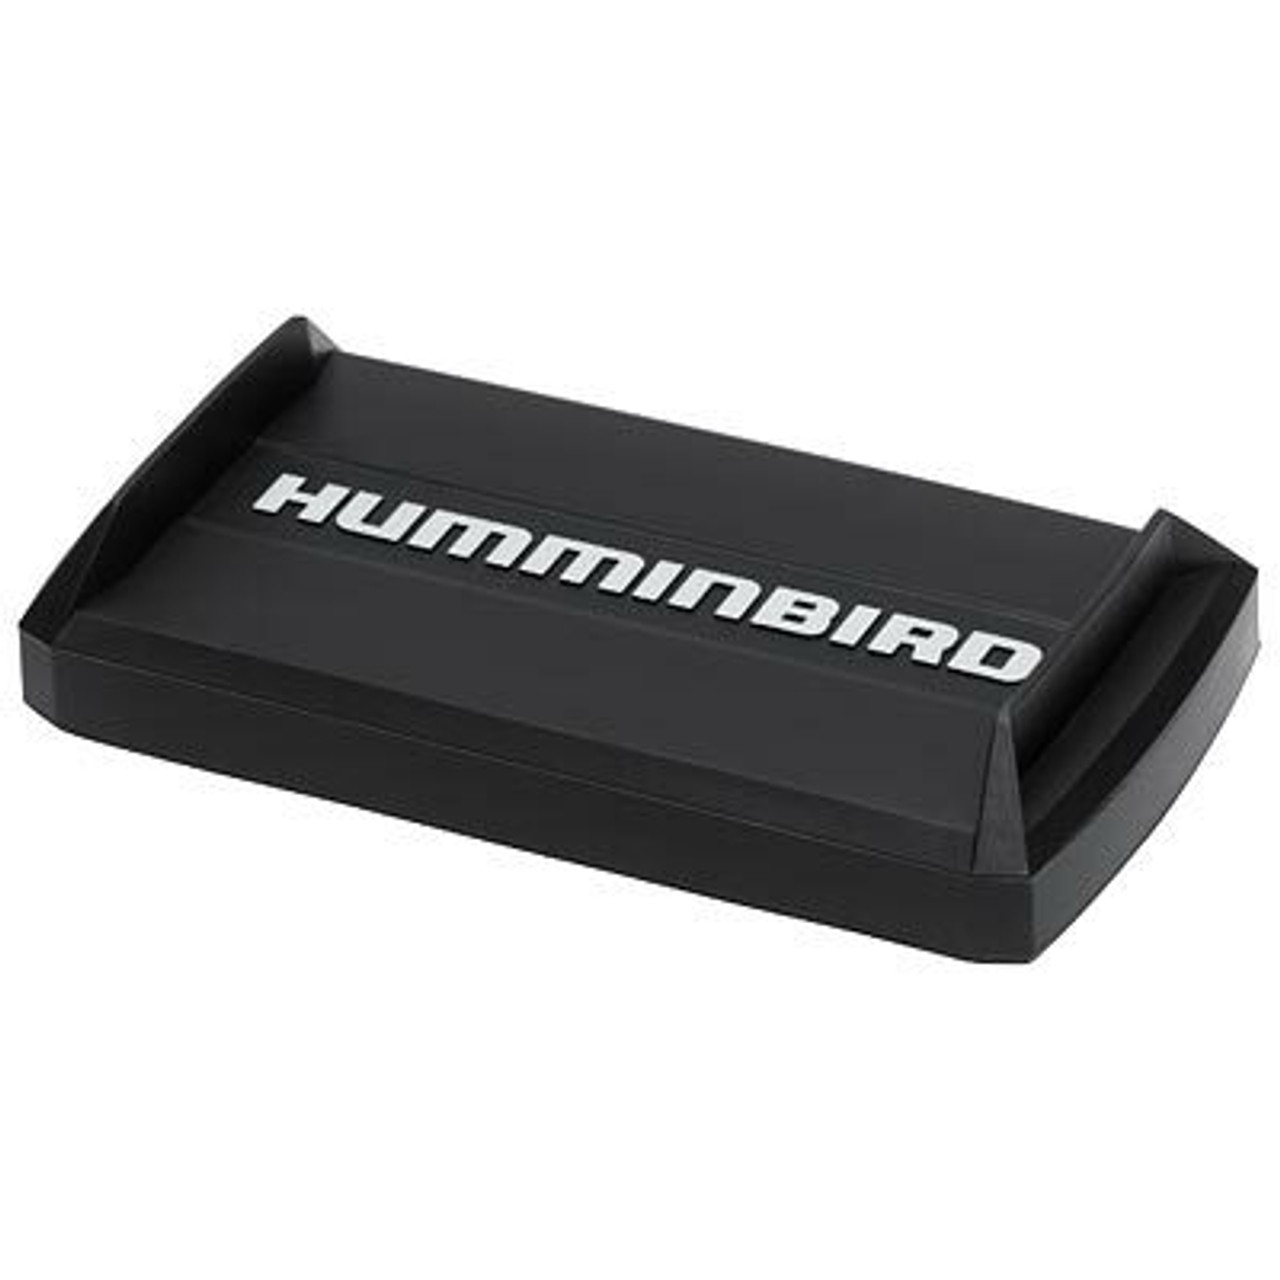 UC H7R2 HELIX 7 Silicone Unit Cover by Humminbird